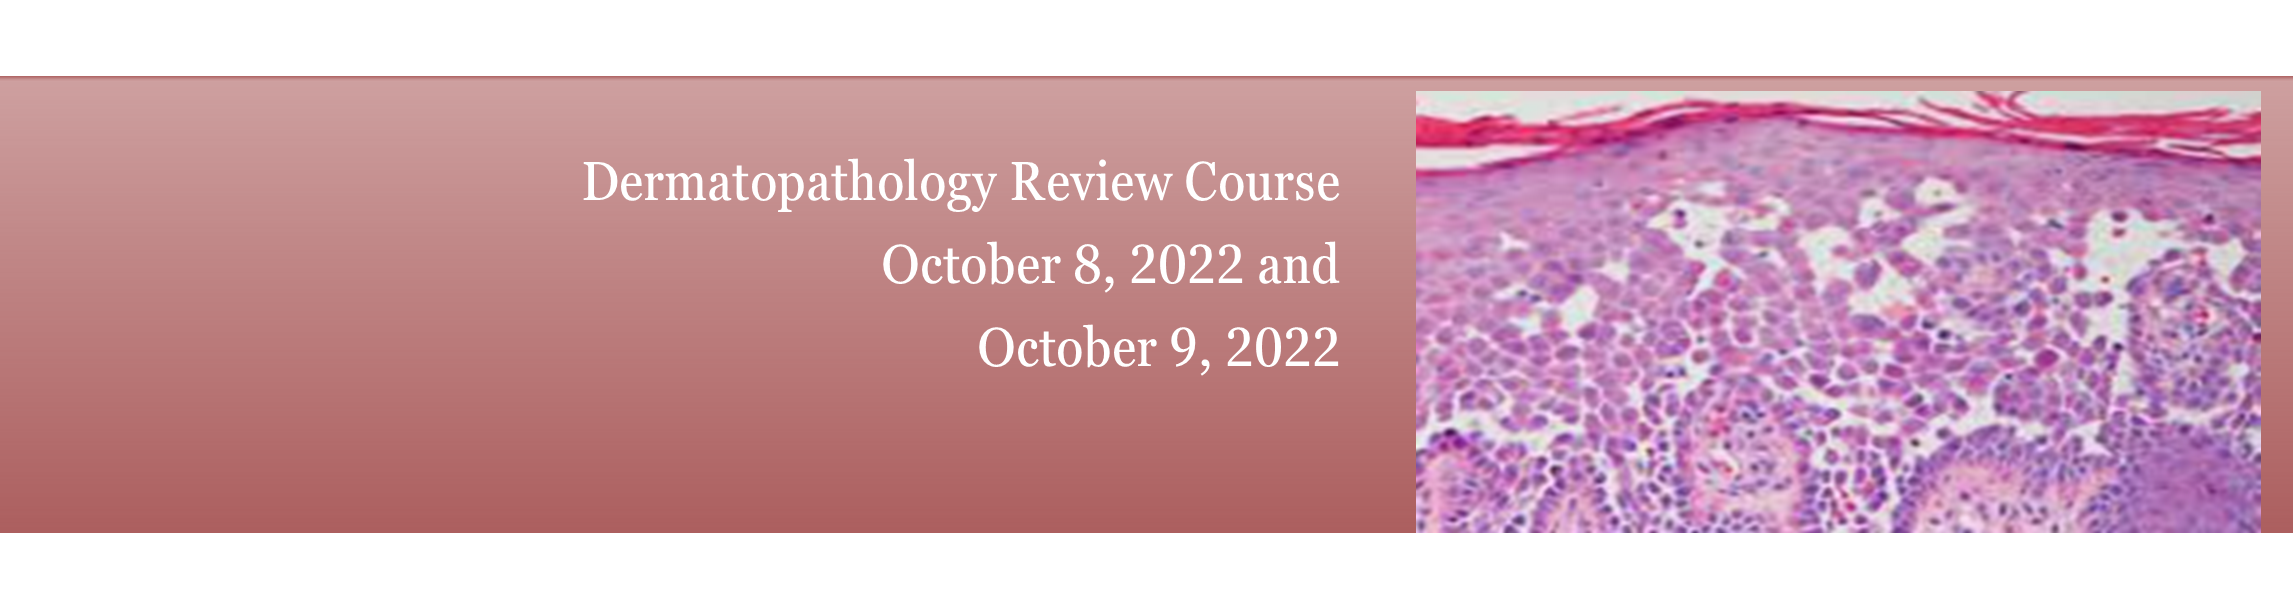 Dermatopathology Review Course Banner